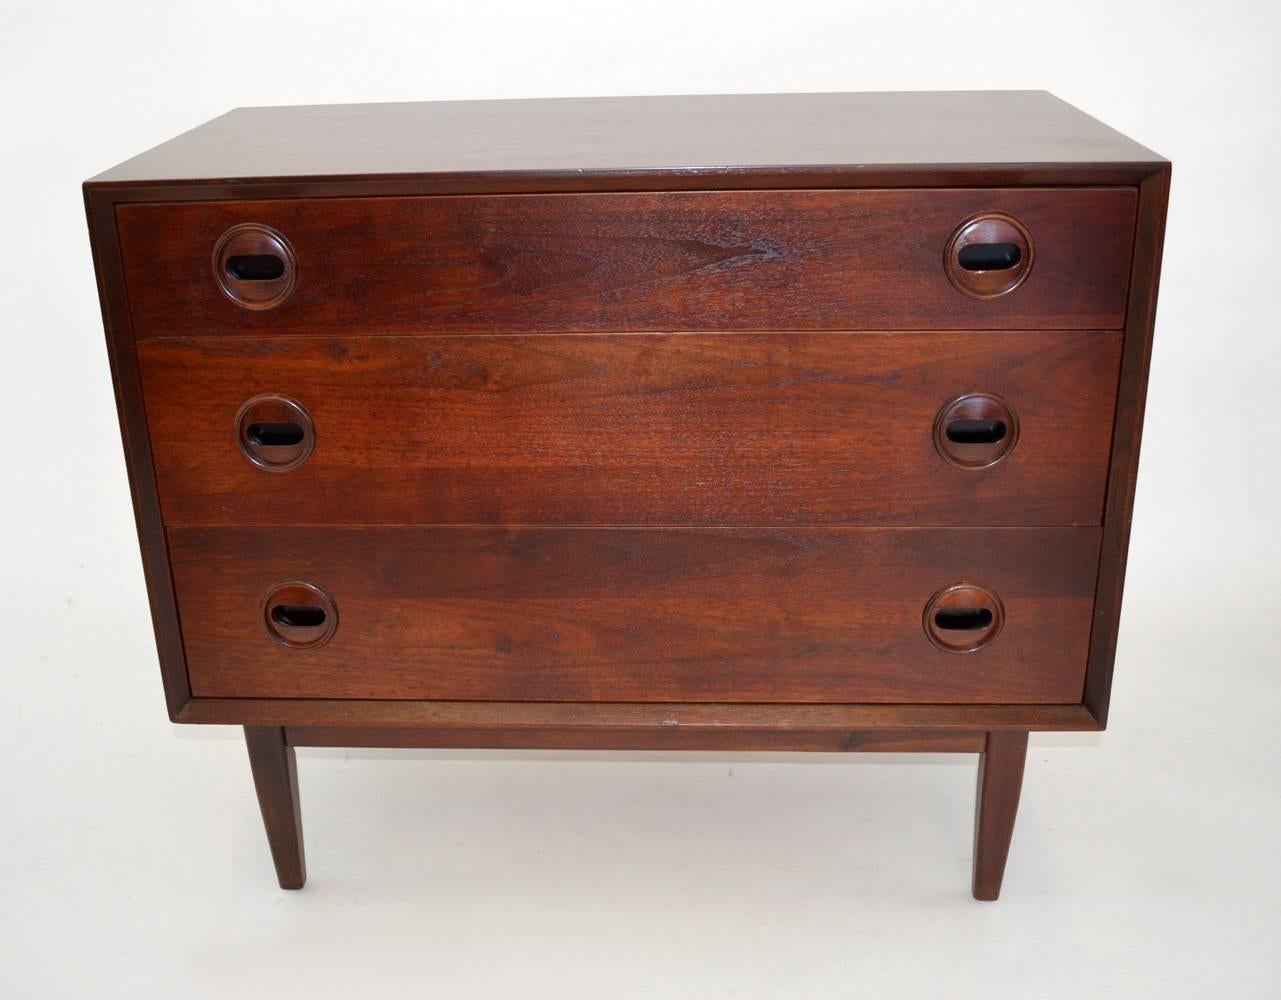 Pair of handsome three-drawer Danish design teak chests of drawers or commodes, circa 1960s. Sleek, modern lines with seldom-seen sculpted round handles. Wood bases. Perfect as a pair or separated as nightstands.